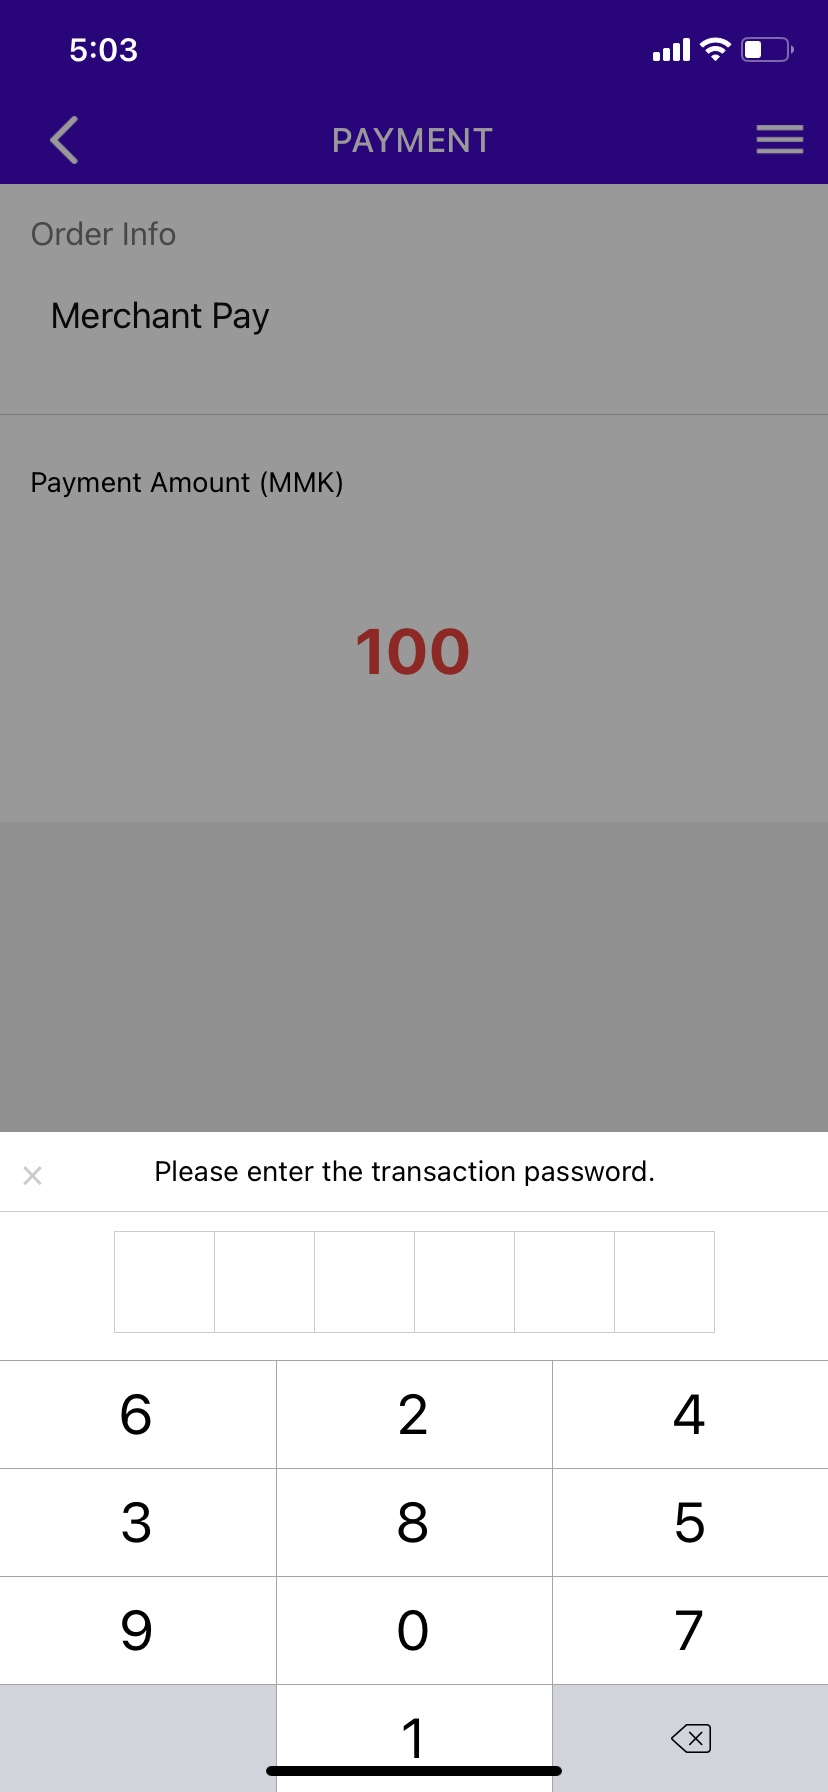 User enters payment password to confirm the transaction